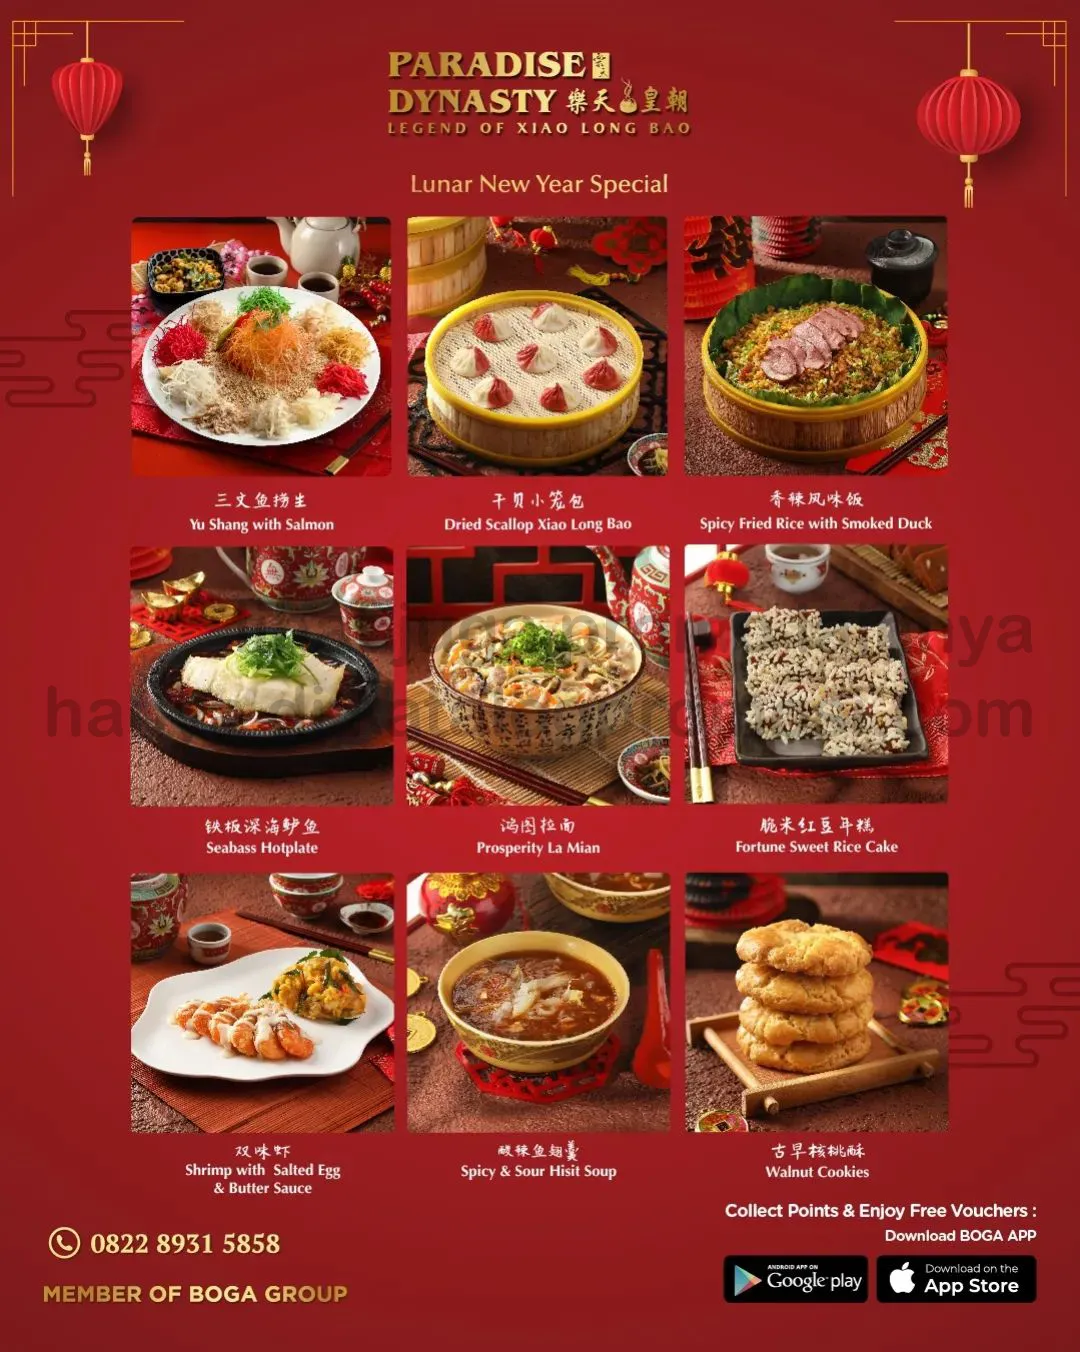 Promo PARADISE DYNASTY Feast of Fortune Lunar New Year Special